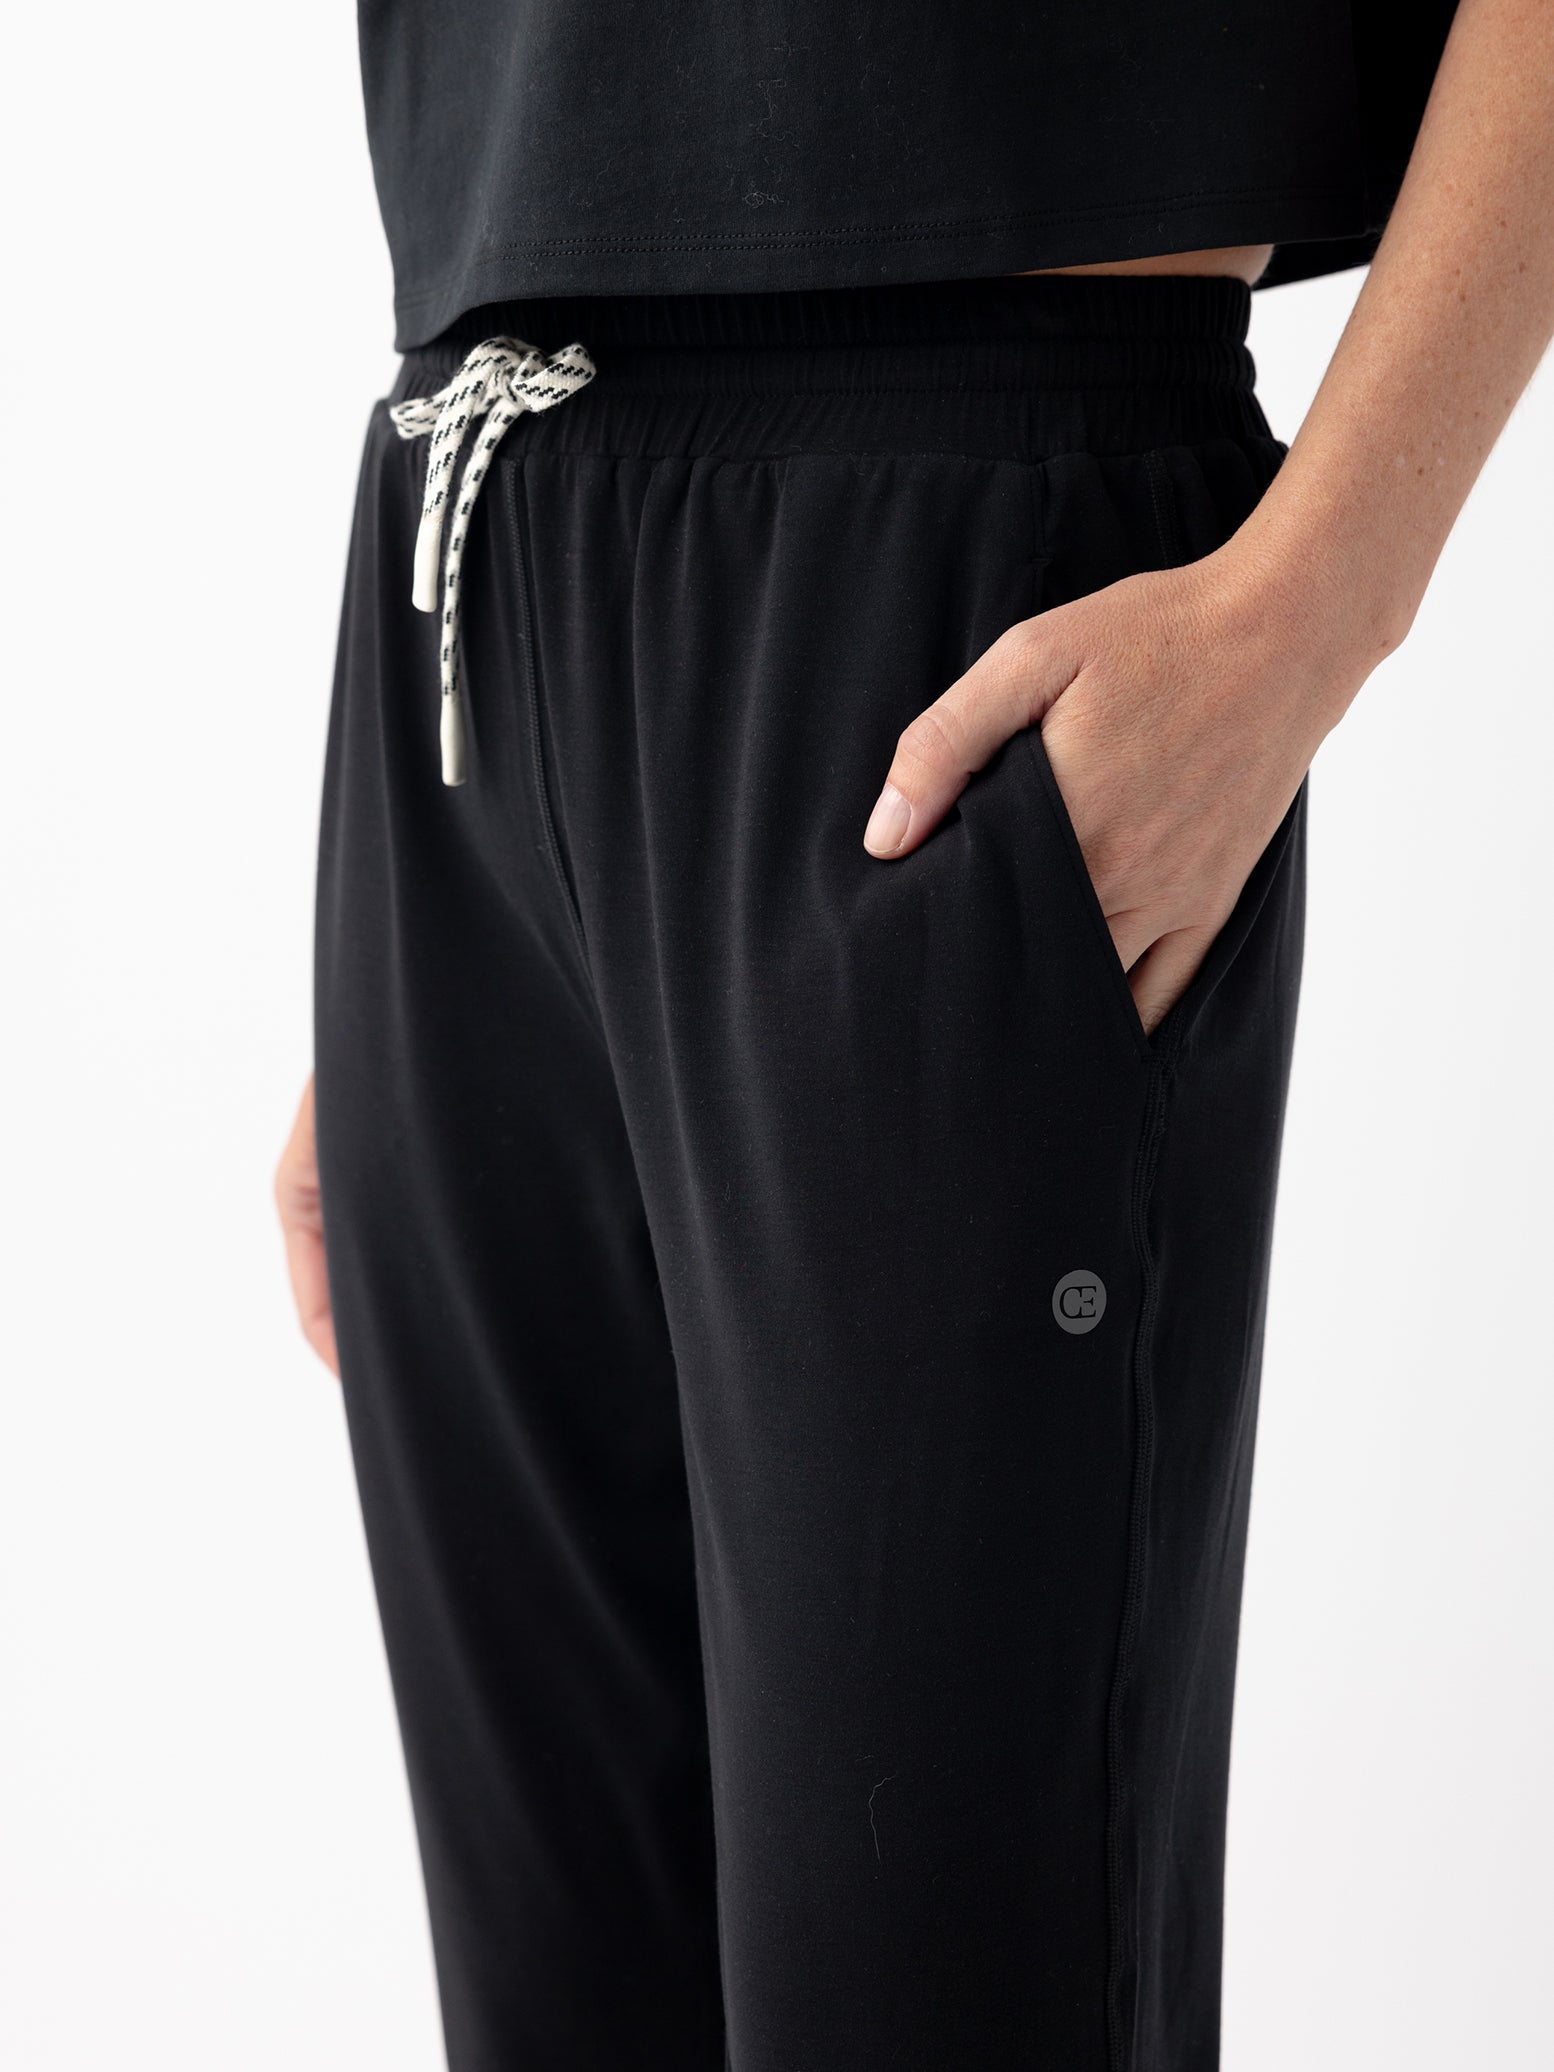 Jet Black Studio Jogger. The Studio Joggers are worn by a woman photographed with a white background. 